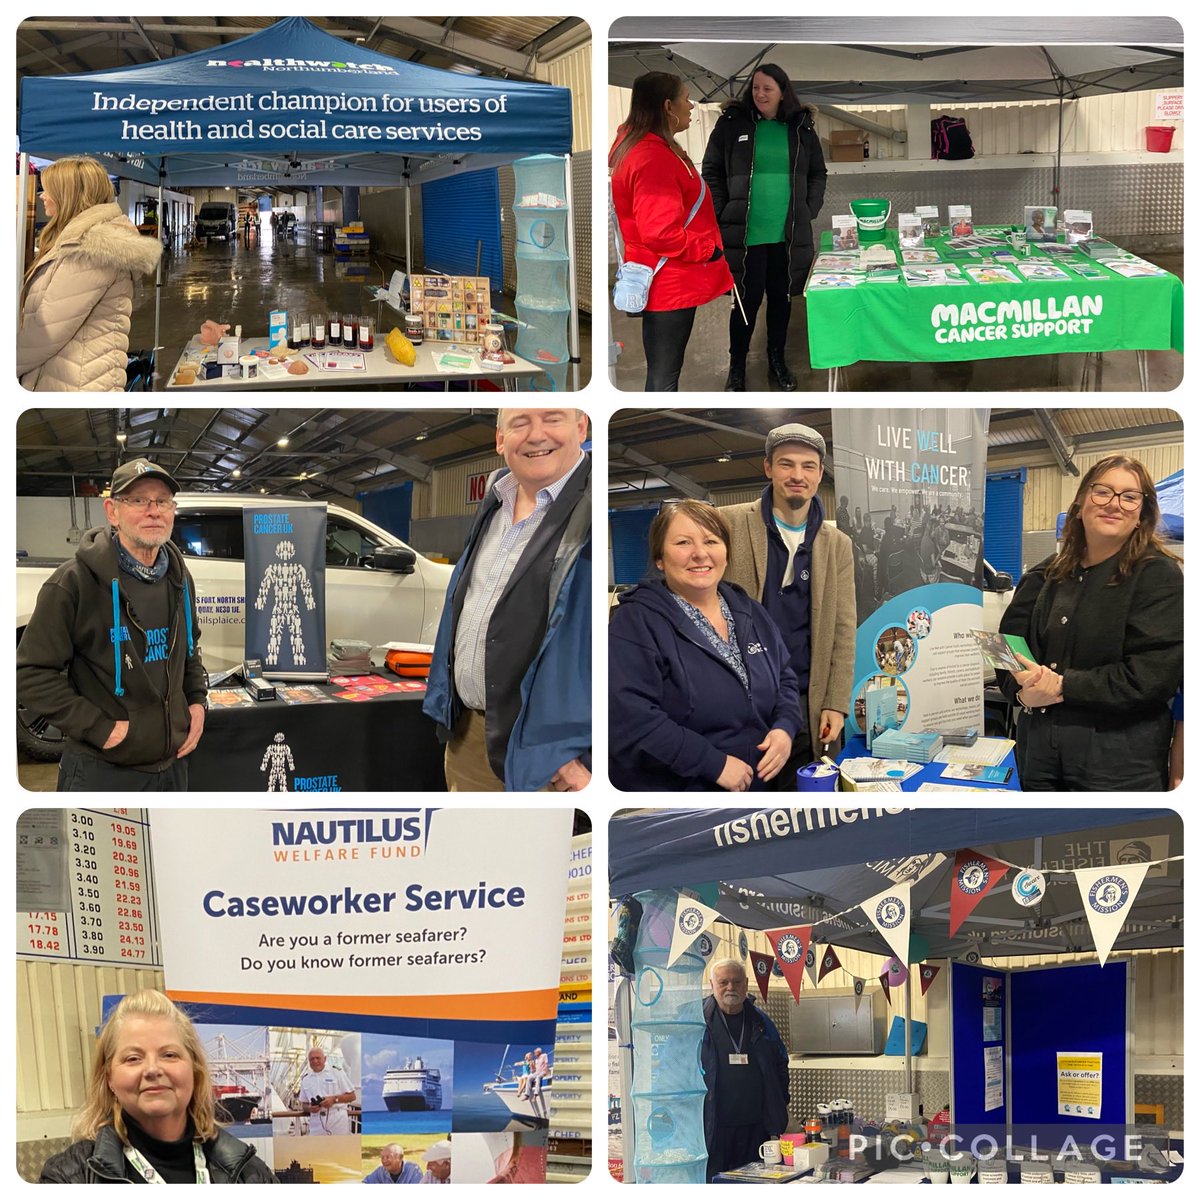 Lots of valuable information & support on offer at the C Aware event ⁦@thefishmish⁩ ⁦@macmillancancer⁩ ⁦@nautilusint⁩ ⁦⁦⁦@livingwithcanc⁩ ⁦@ProstateUK⁩ ⁦@HWNTyneside⁩ In the Fish Market until 3pm today 28th